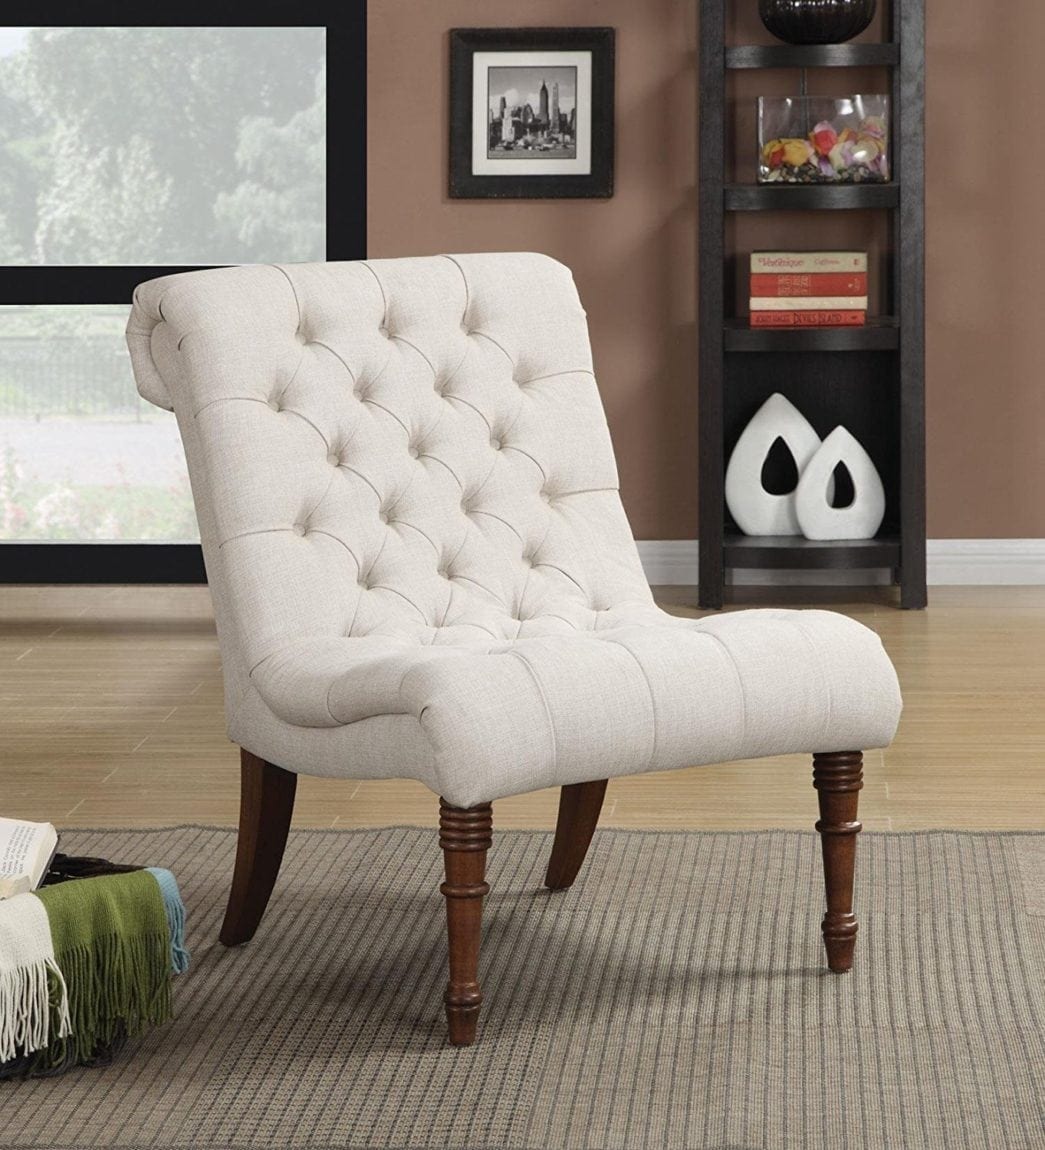 Elegant Accent Chairs On A Budget Under 200 1045x1150 